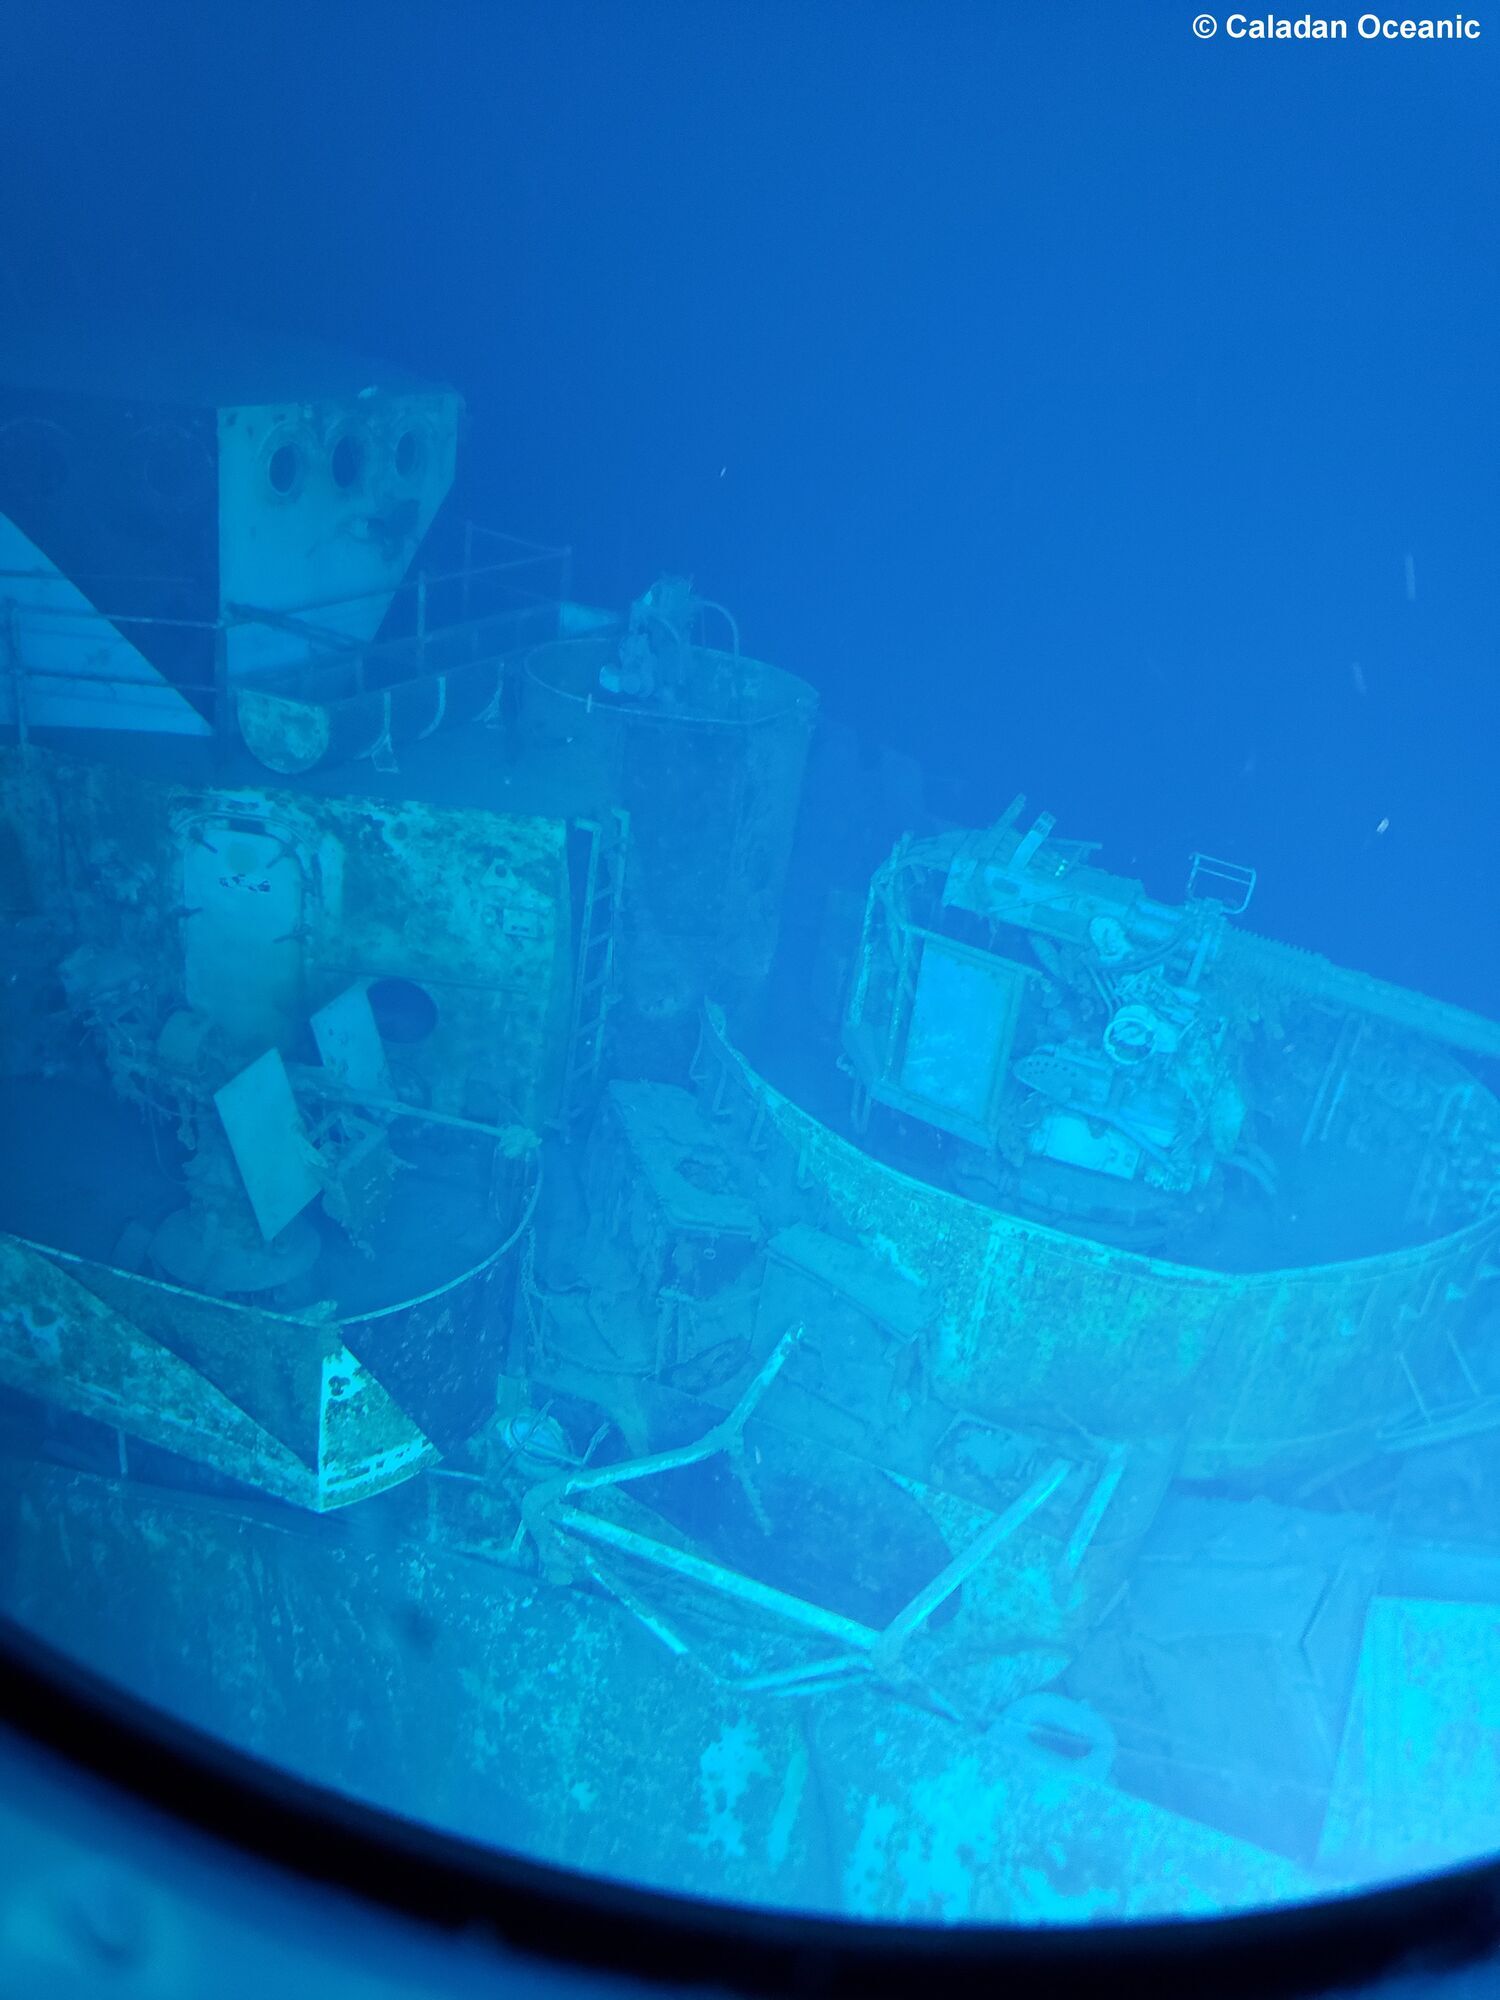 The gun turrets and part of the ship's deck have been preserved